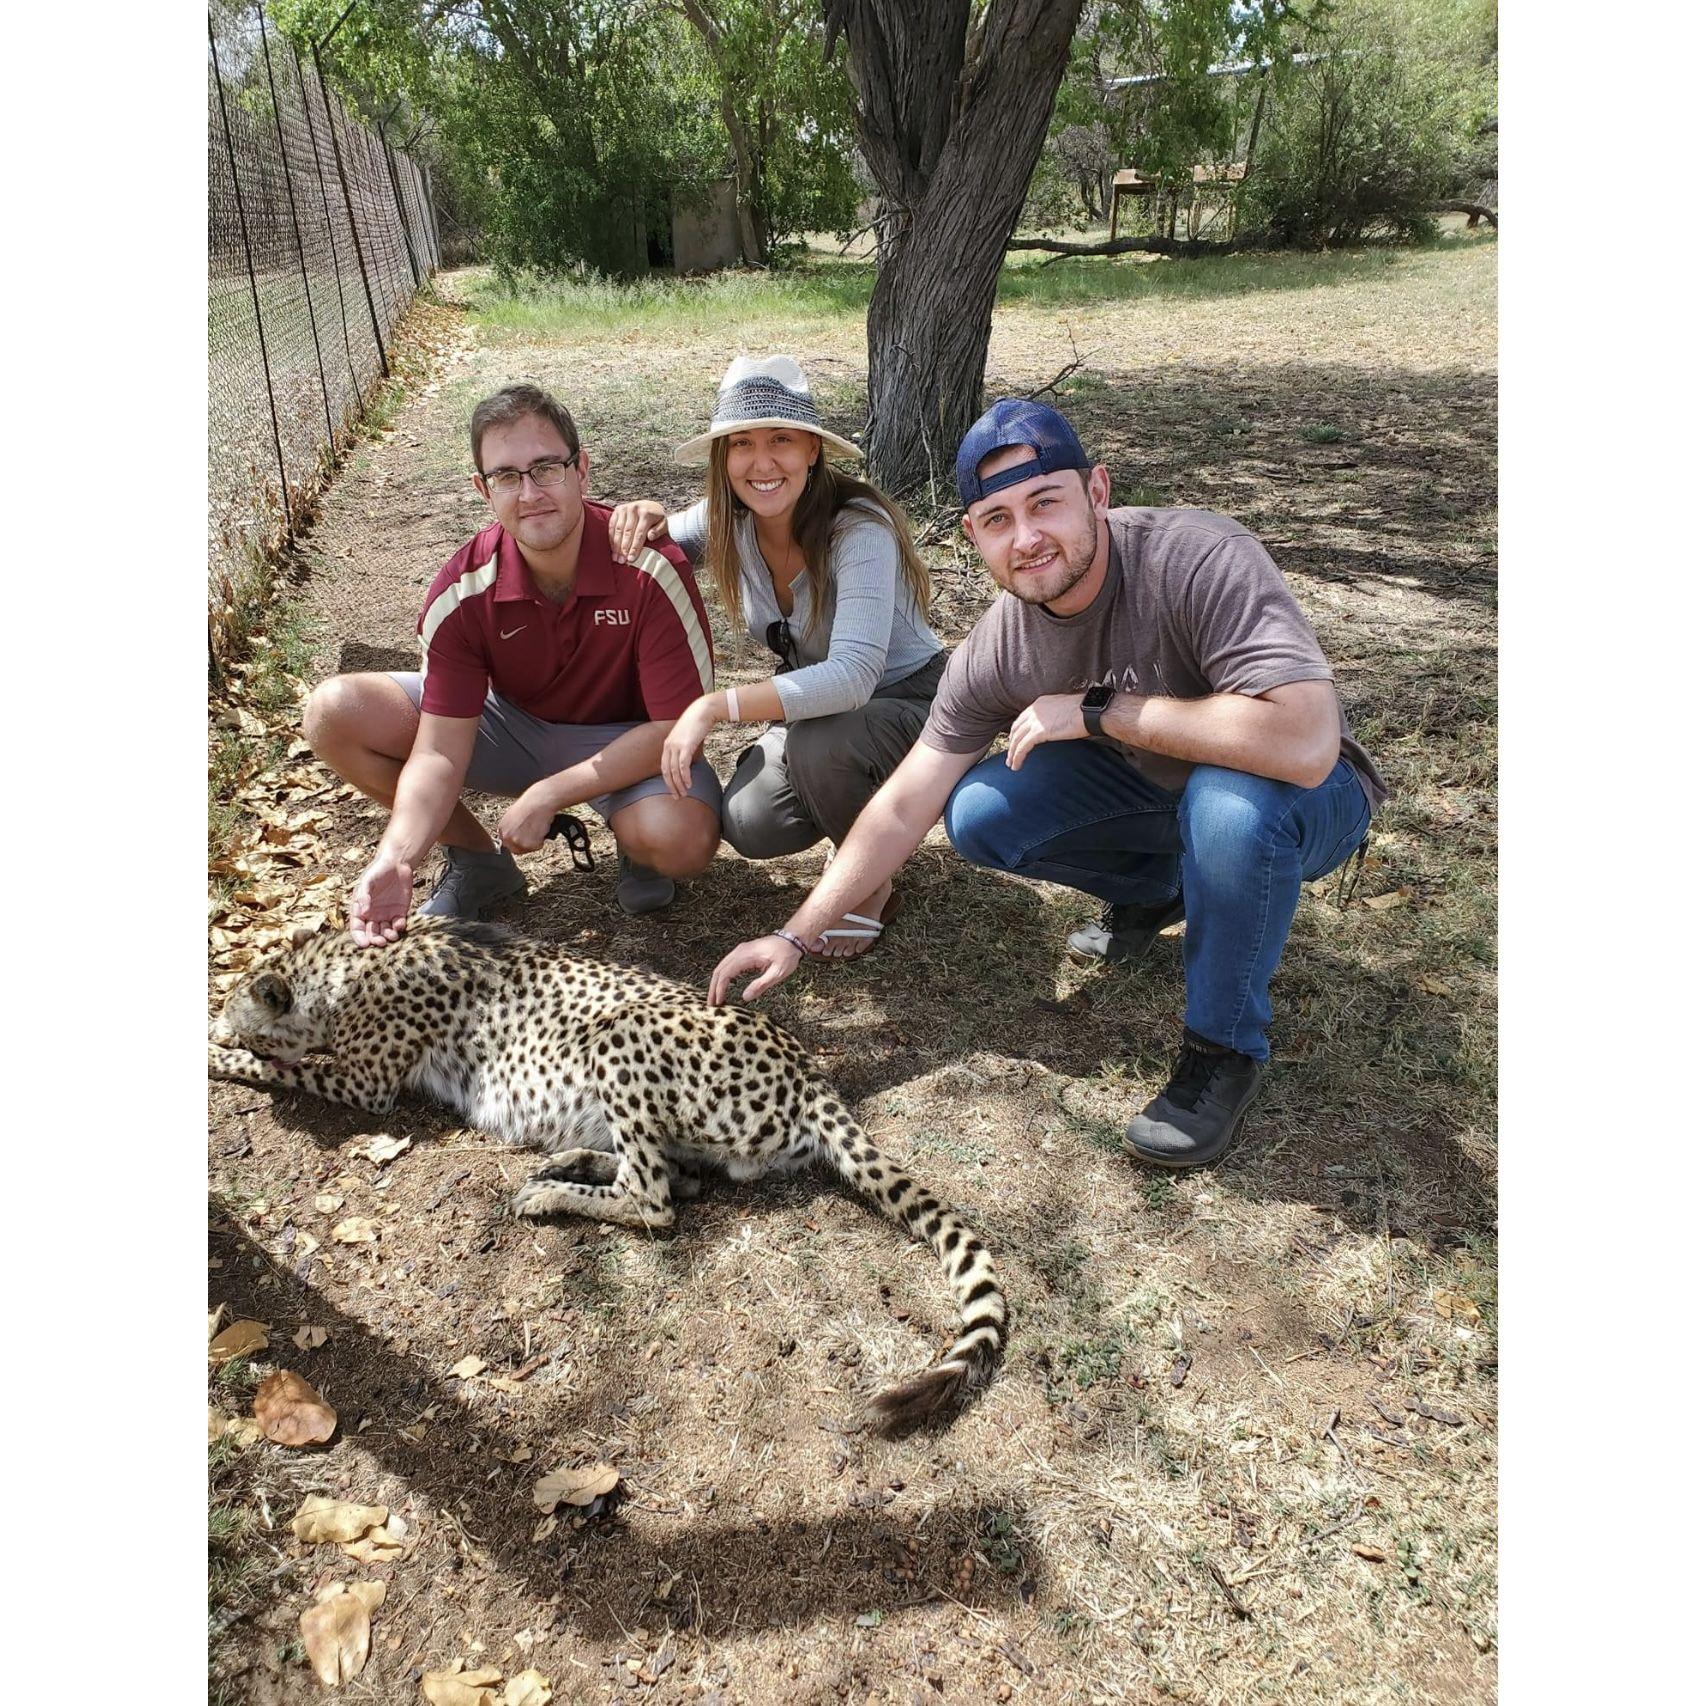 During their trip to South Africa, Jordan, Fred and Fred's brother, Estiaan take an exciting venture into a cheetah sanctuary!